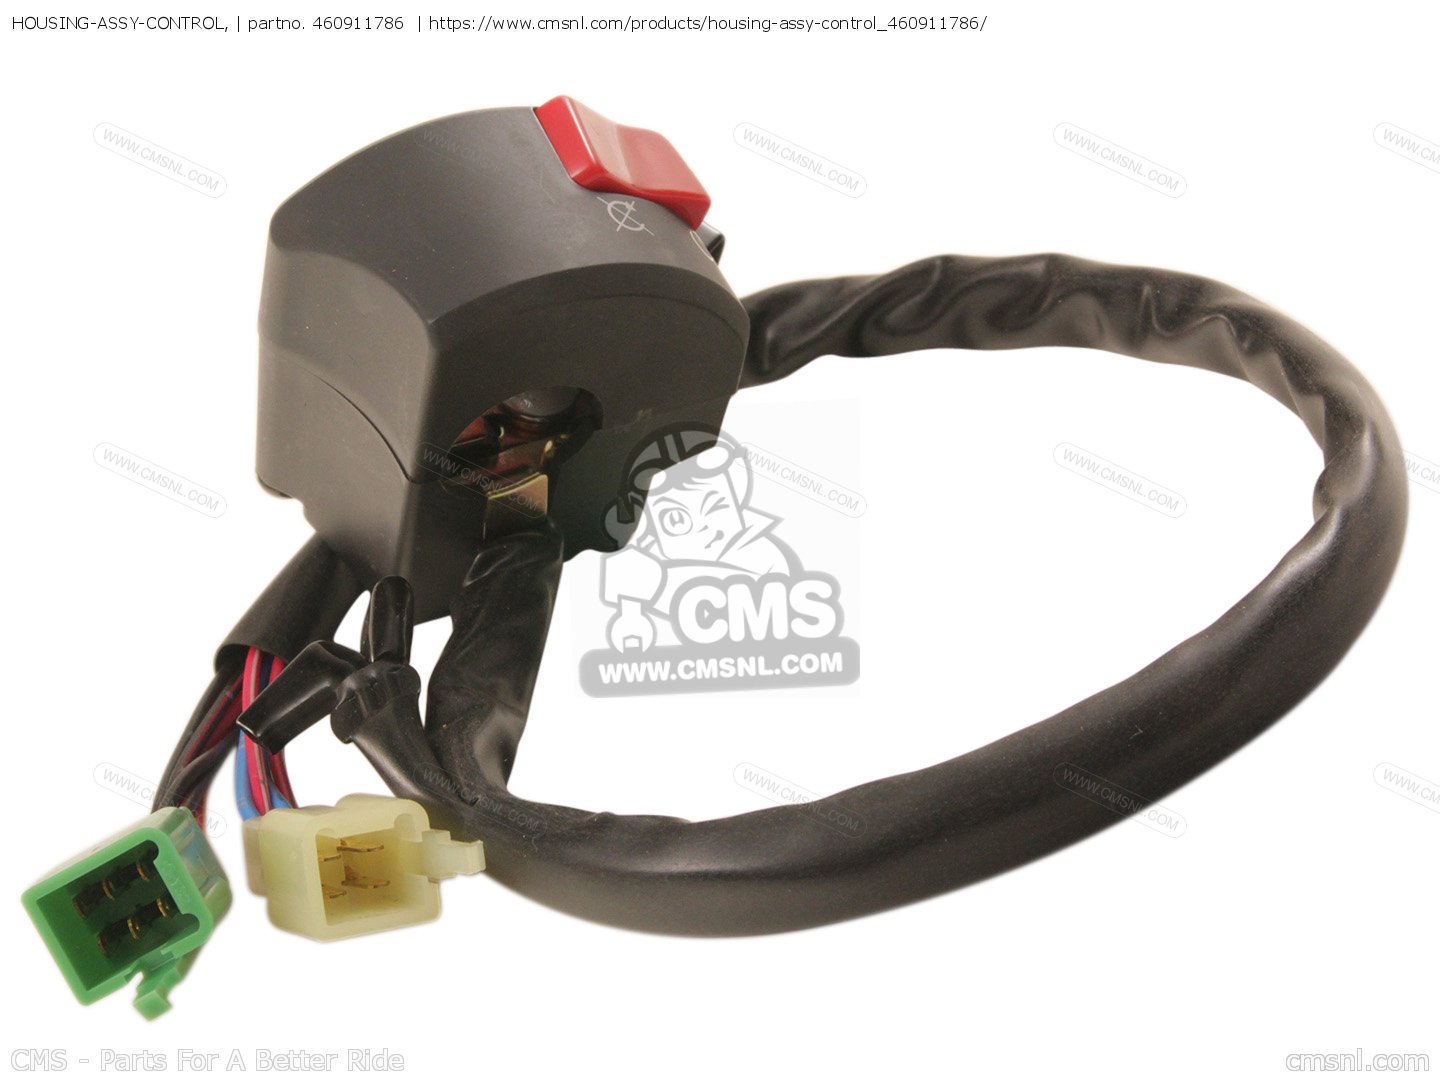 HOUSING-ASSY-CONTROL, for ZX600J1H NINJA ZX6R 2000 EUROPE UK FR IS 